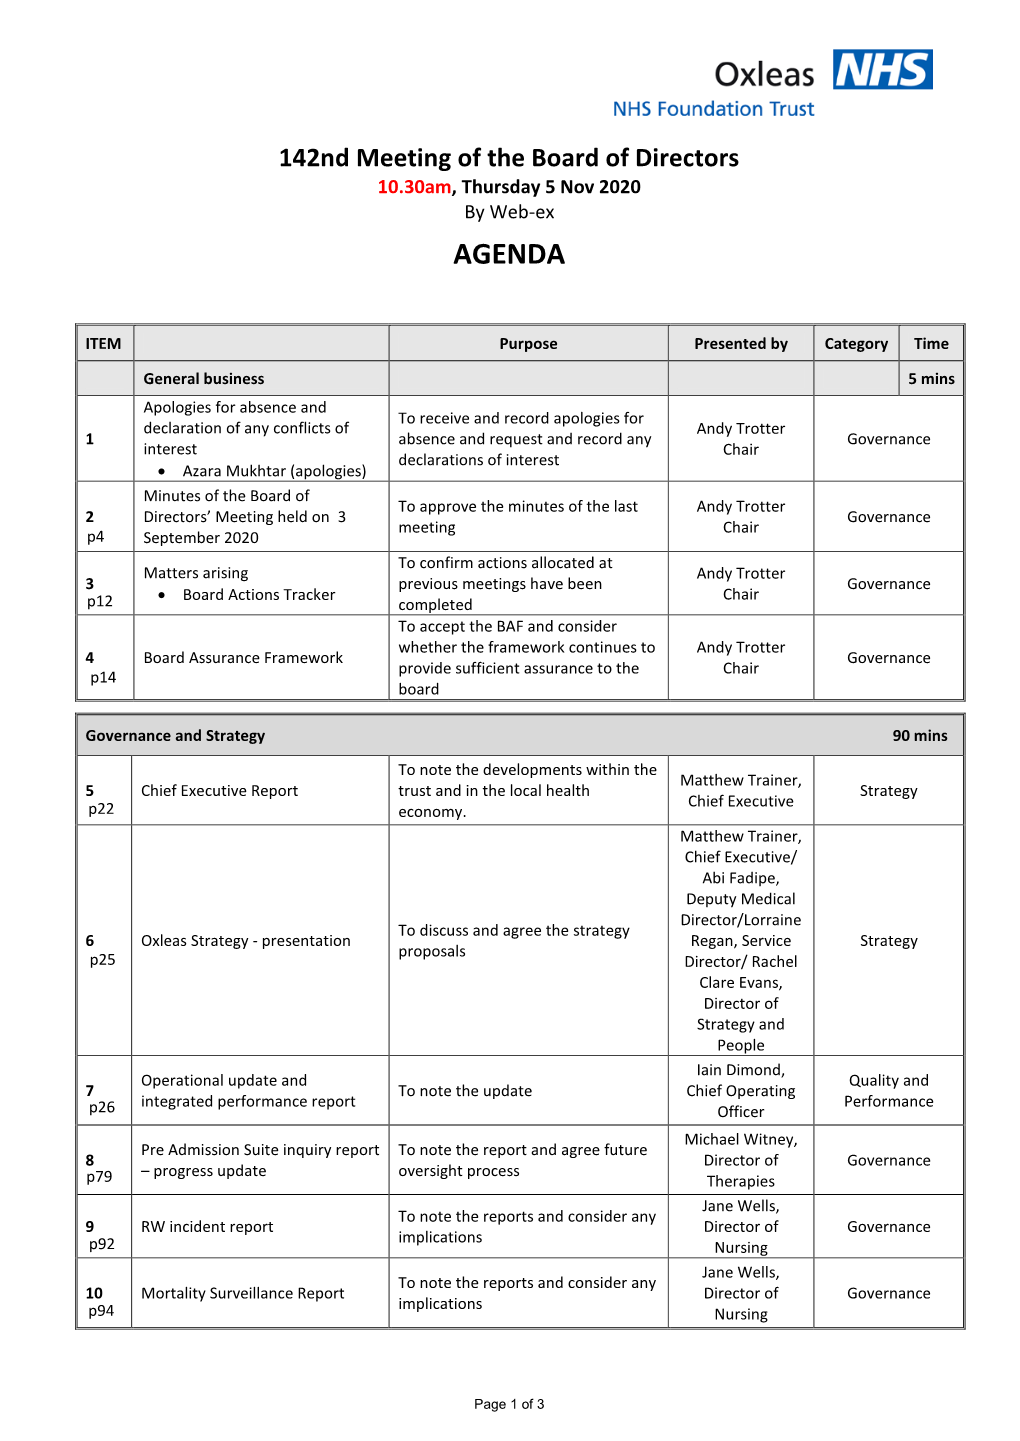 142Nd Meeting of the Board of Directors 10.30Am, Thursday 5 Nov 2020 by Web-Ex AGENDA